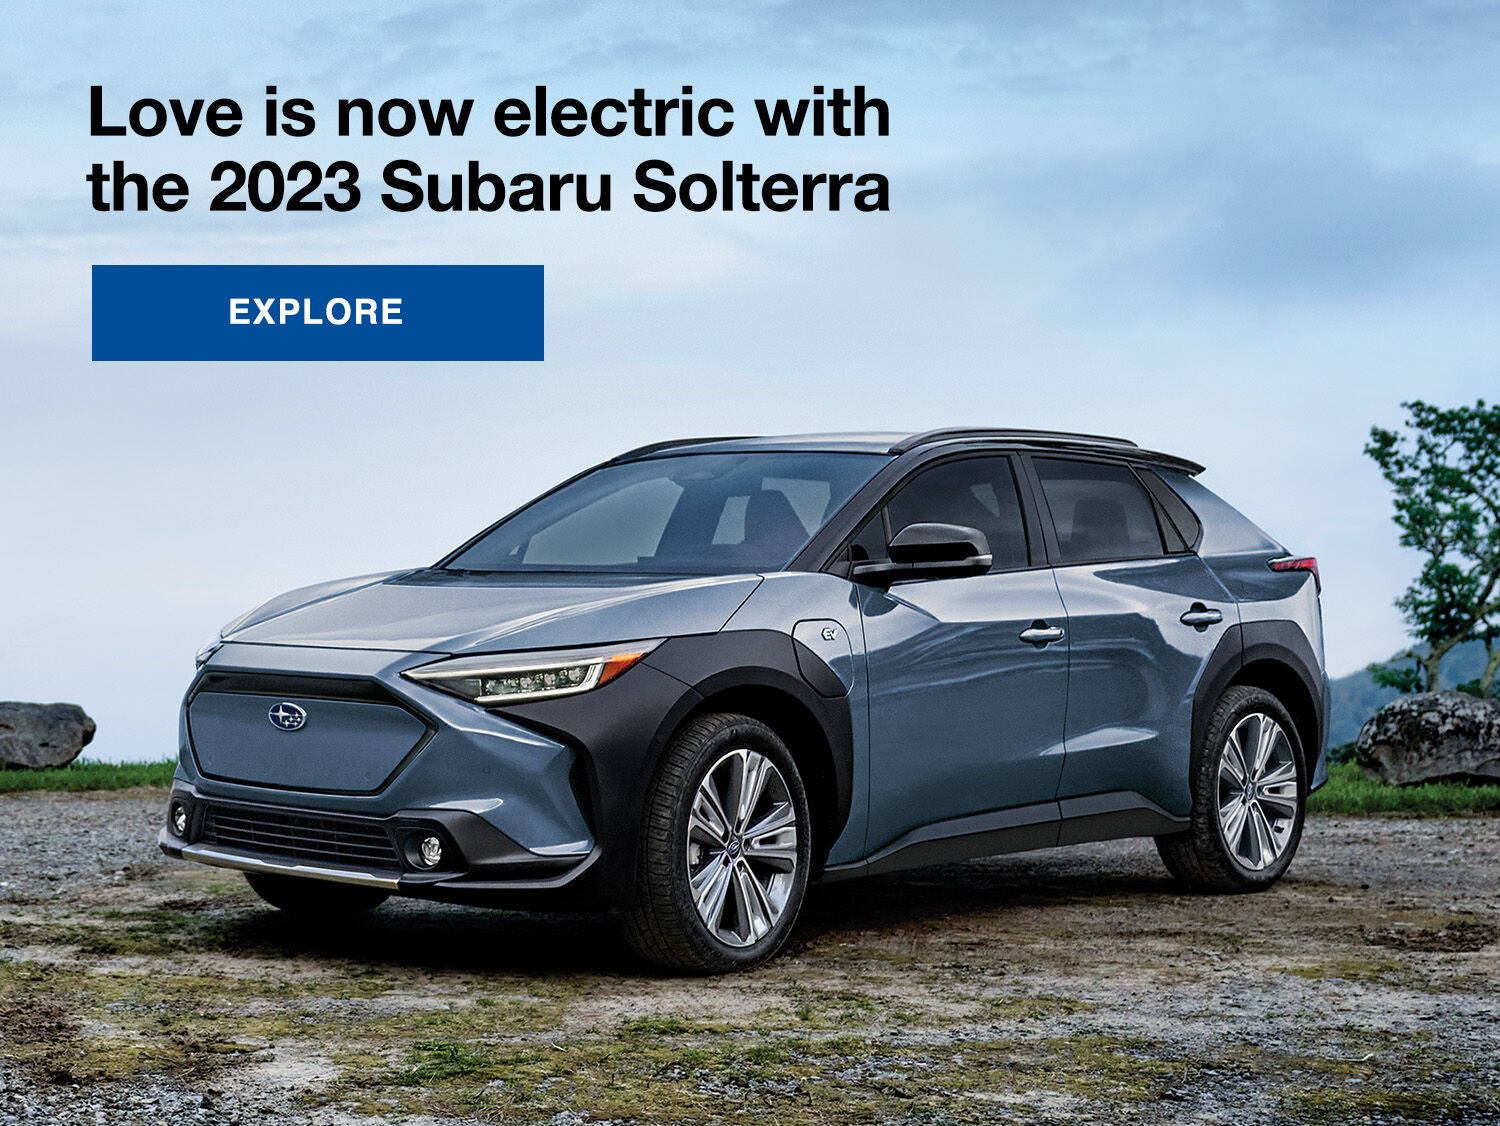 Love is now electric with the 2023 Subaru Solterra